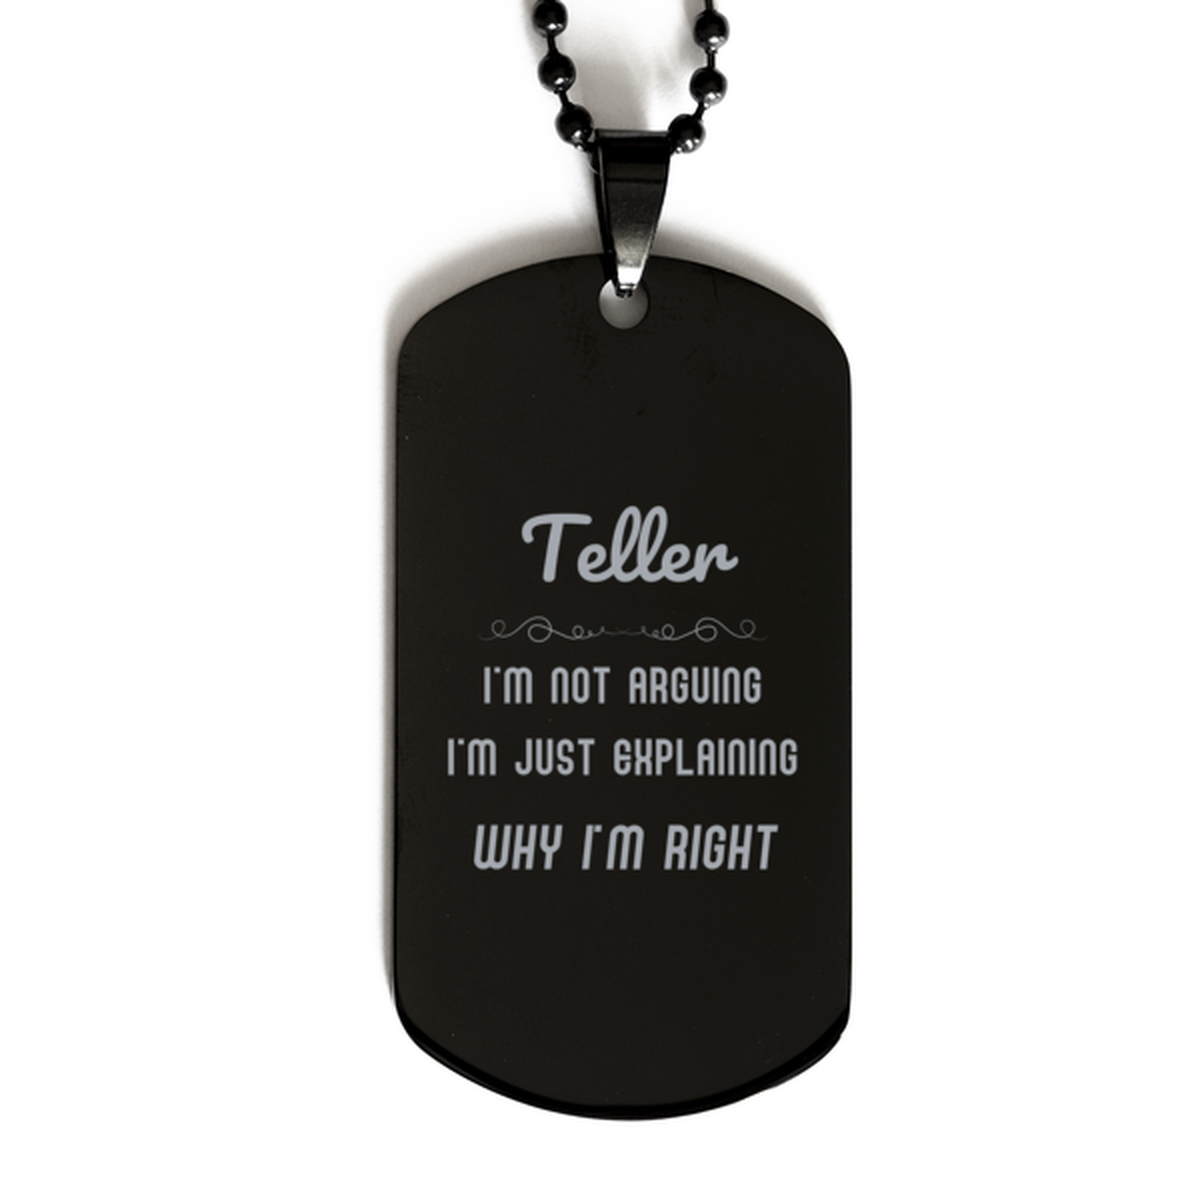 Teller I'm not Arguing. I'm Just Explaining Why I'm RIGHT Black Dog Tag, Funny Saying Quote Teller Gifts For Teller Graduation Birthday Christmas Gifts for Men Women Coworker